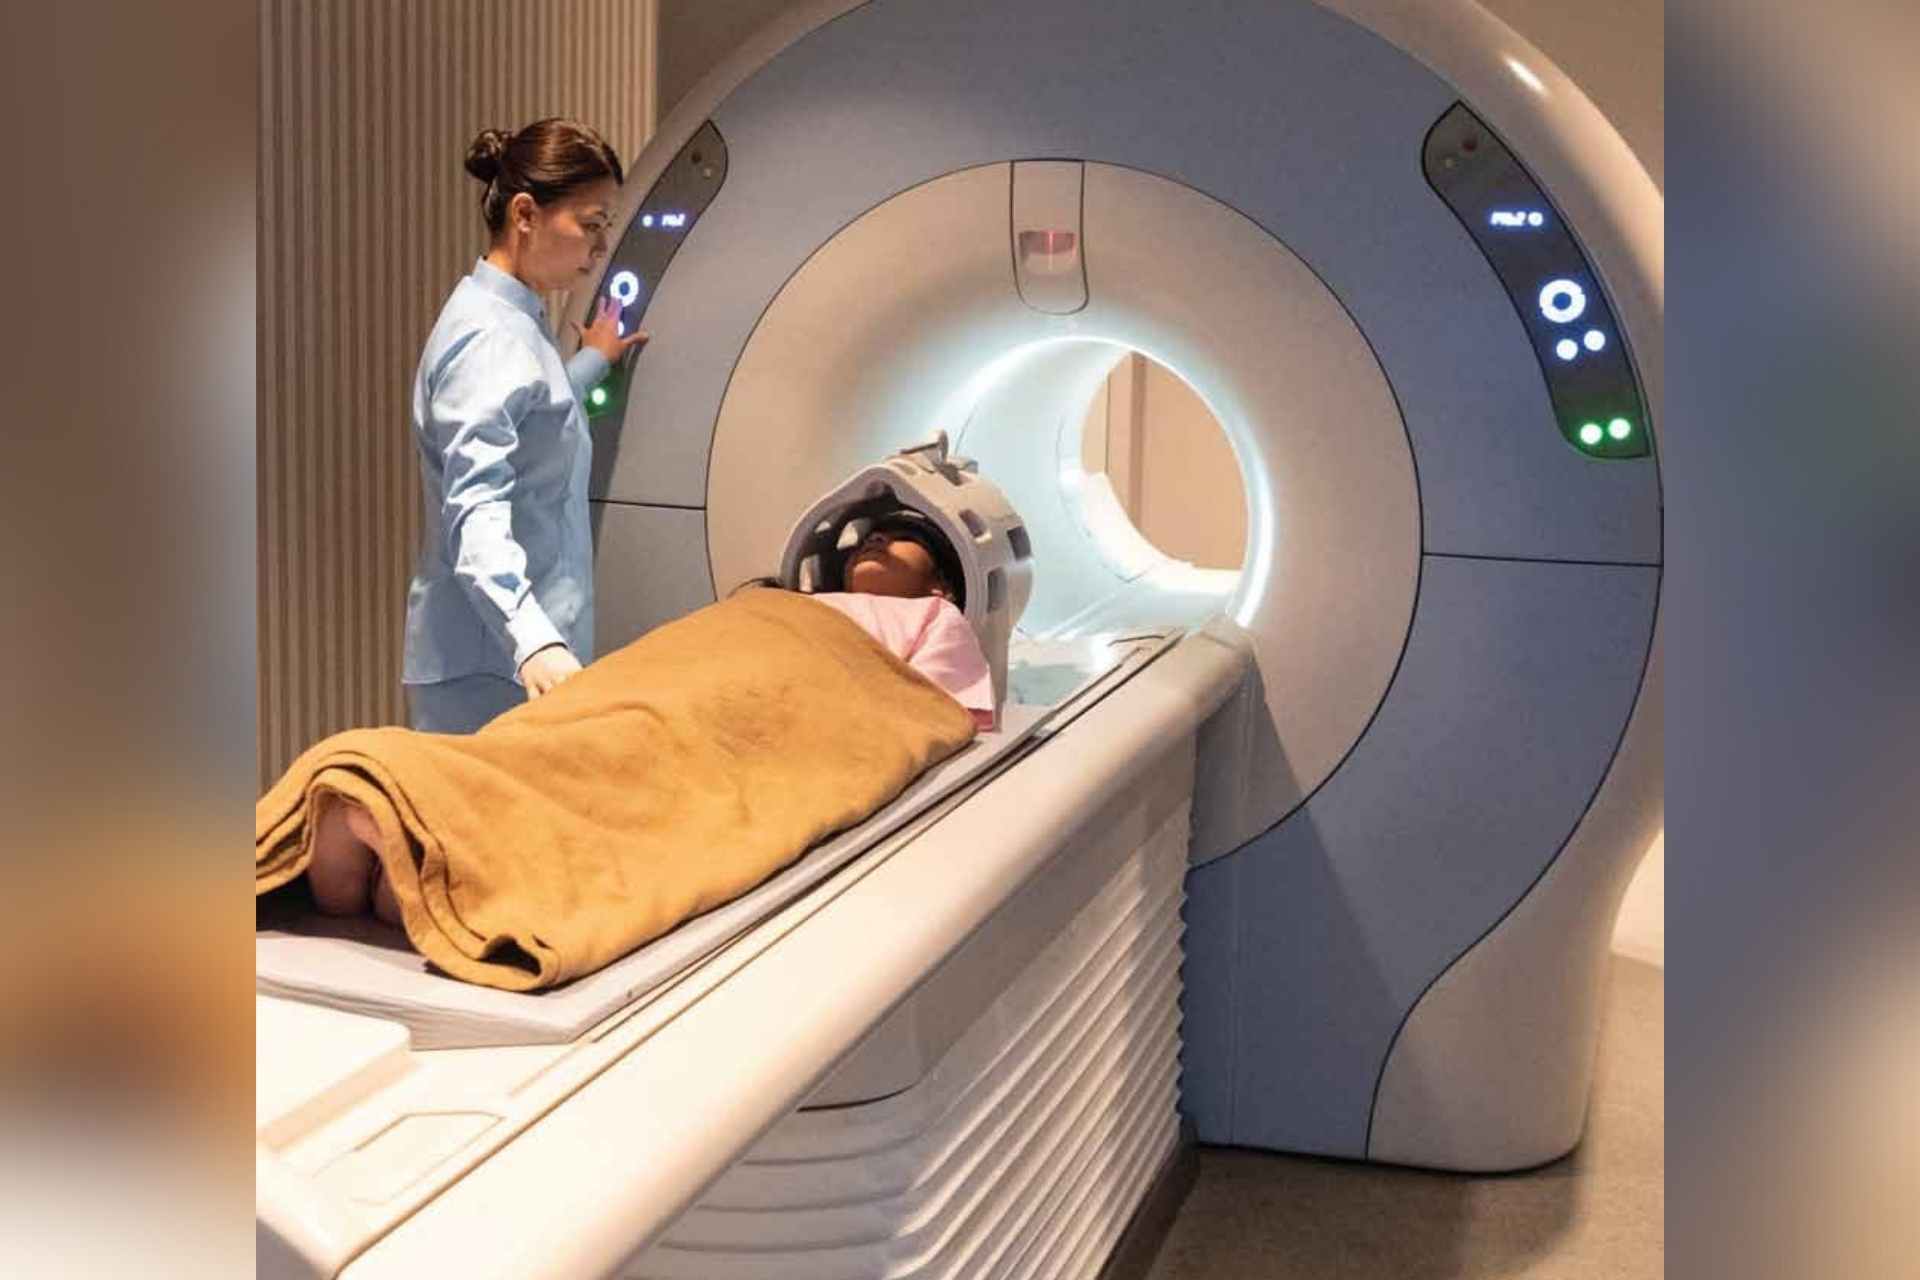 The new MRI brain coil allows the DMC Radiology Department to perform scans on patients who previously had to travel to gain access to this equipment.